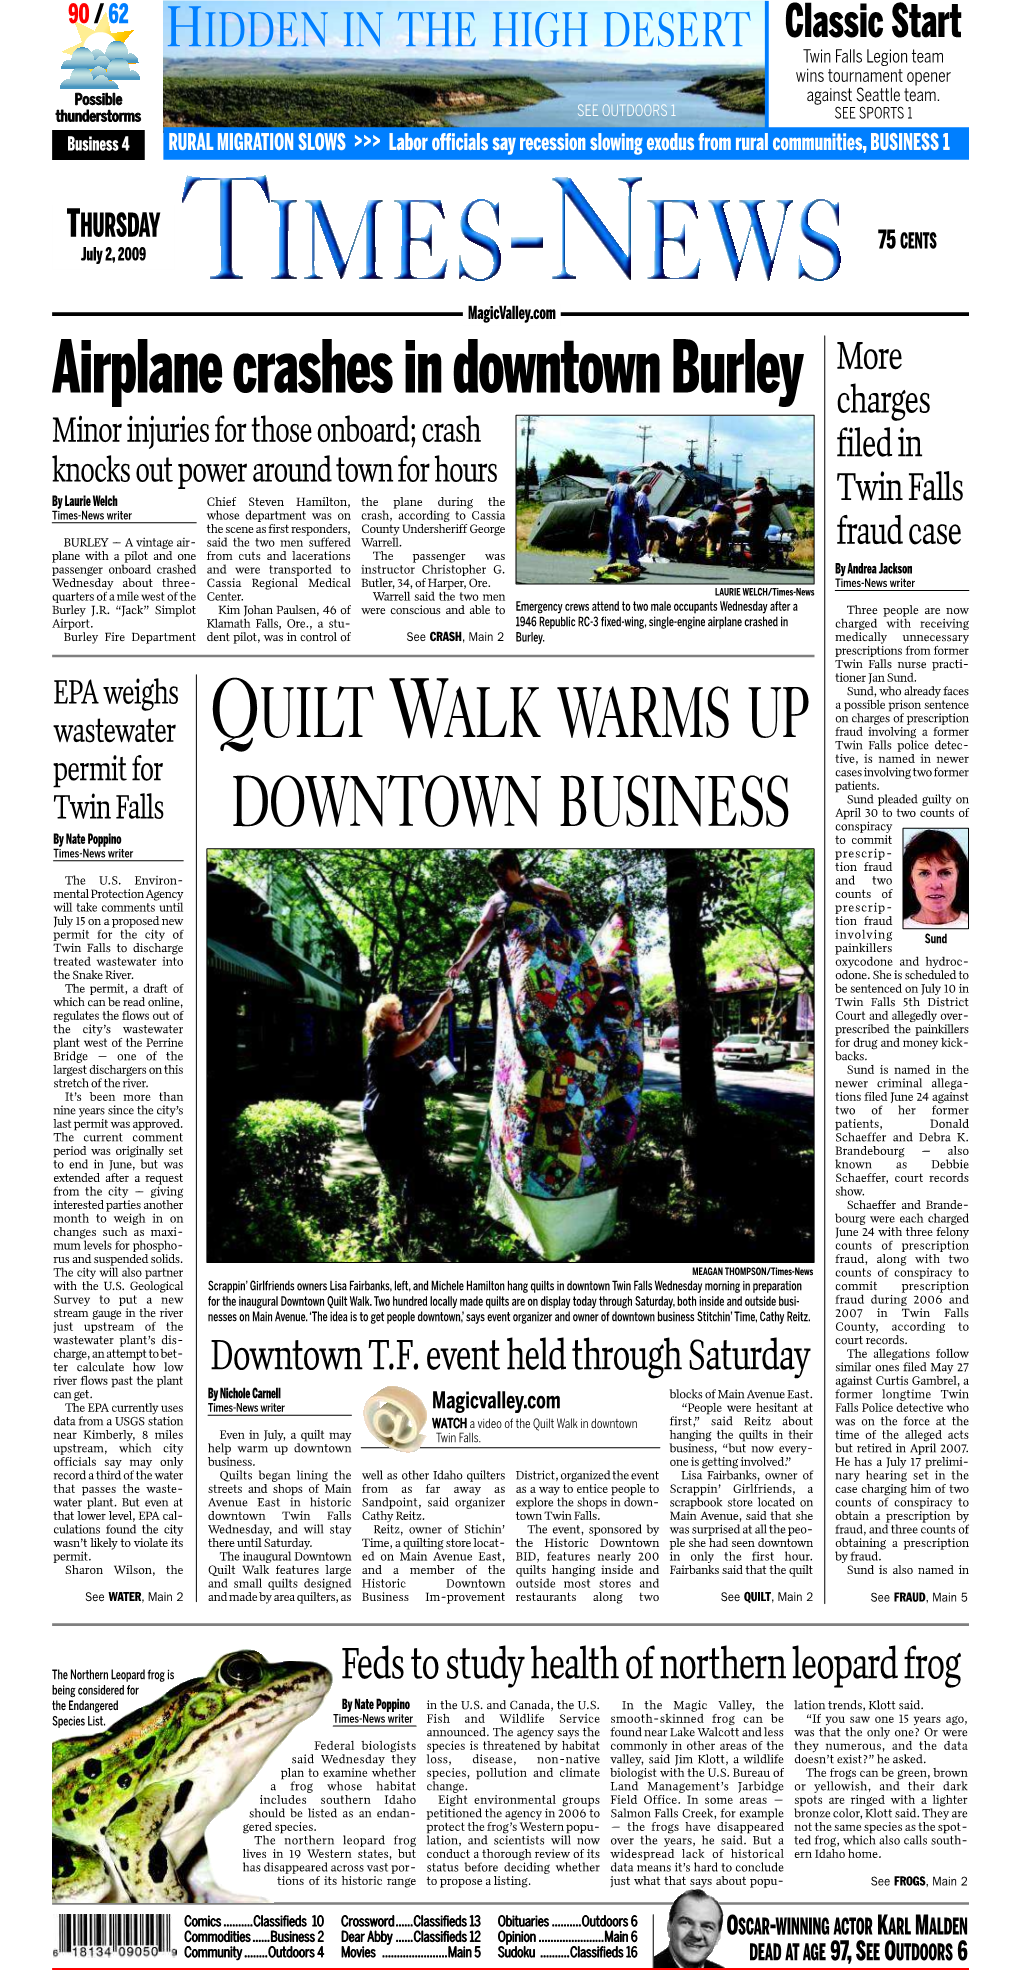 Quilt Walk Warms up Downtown Business